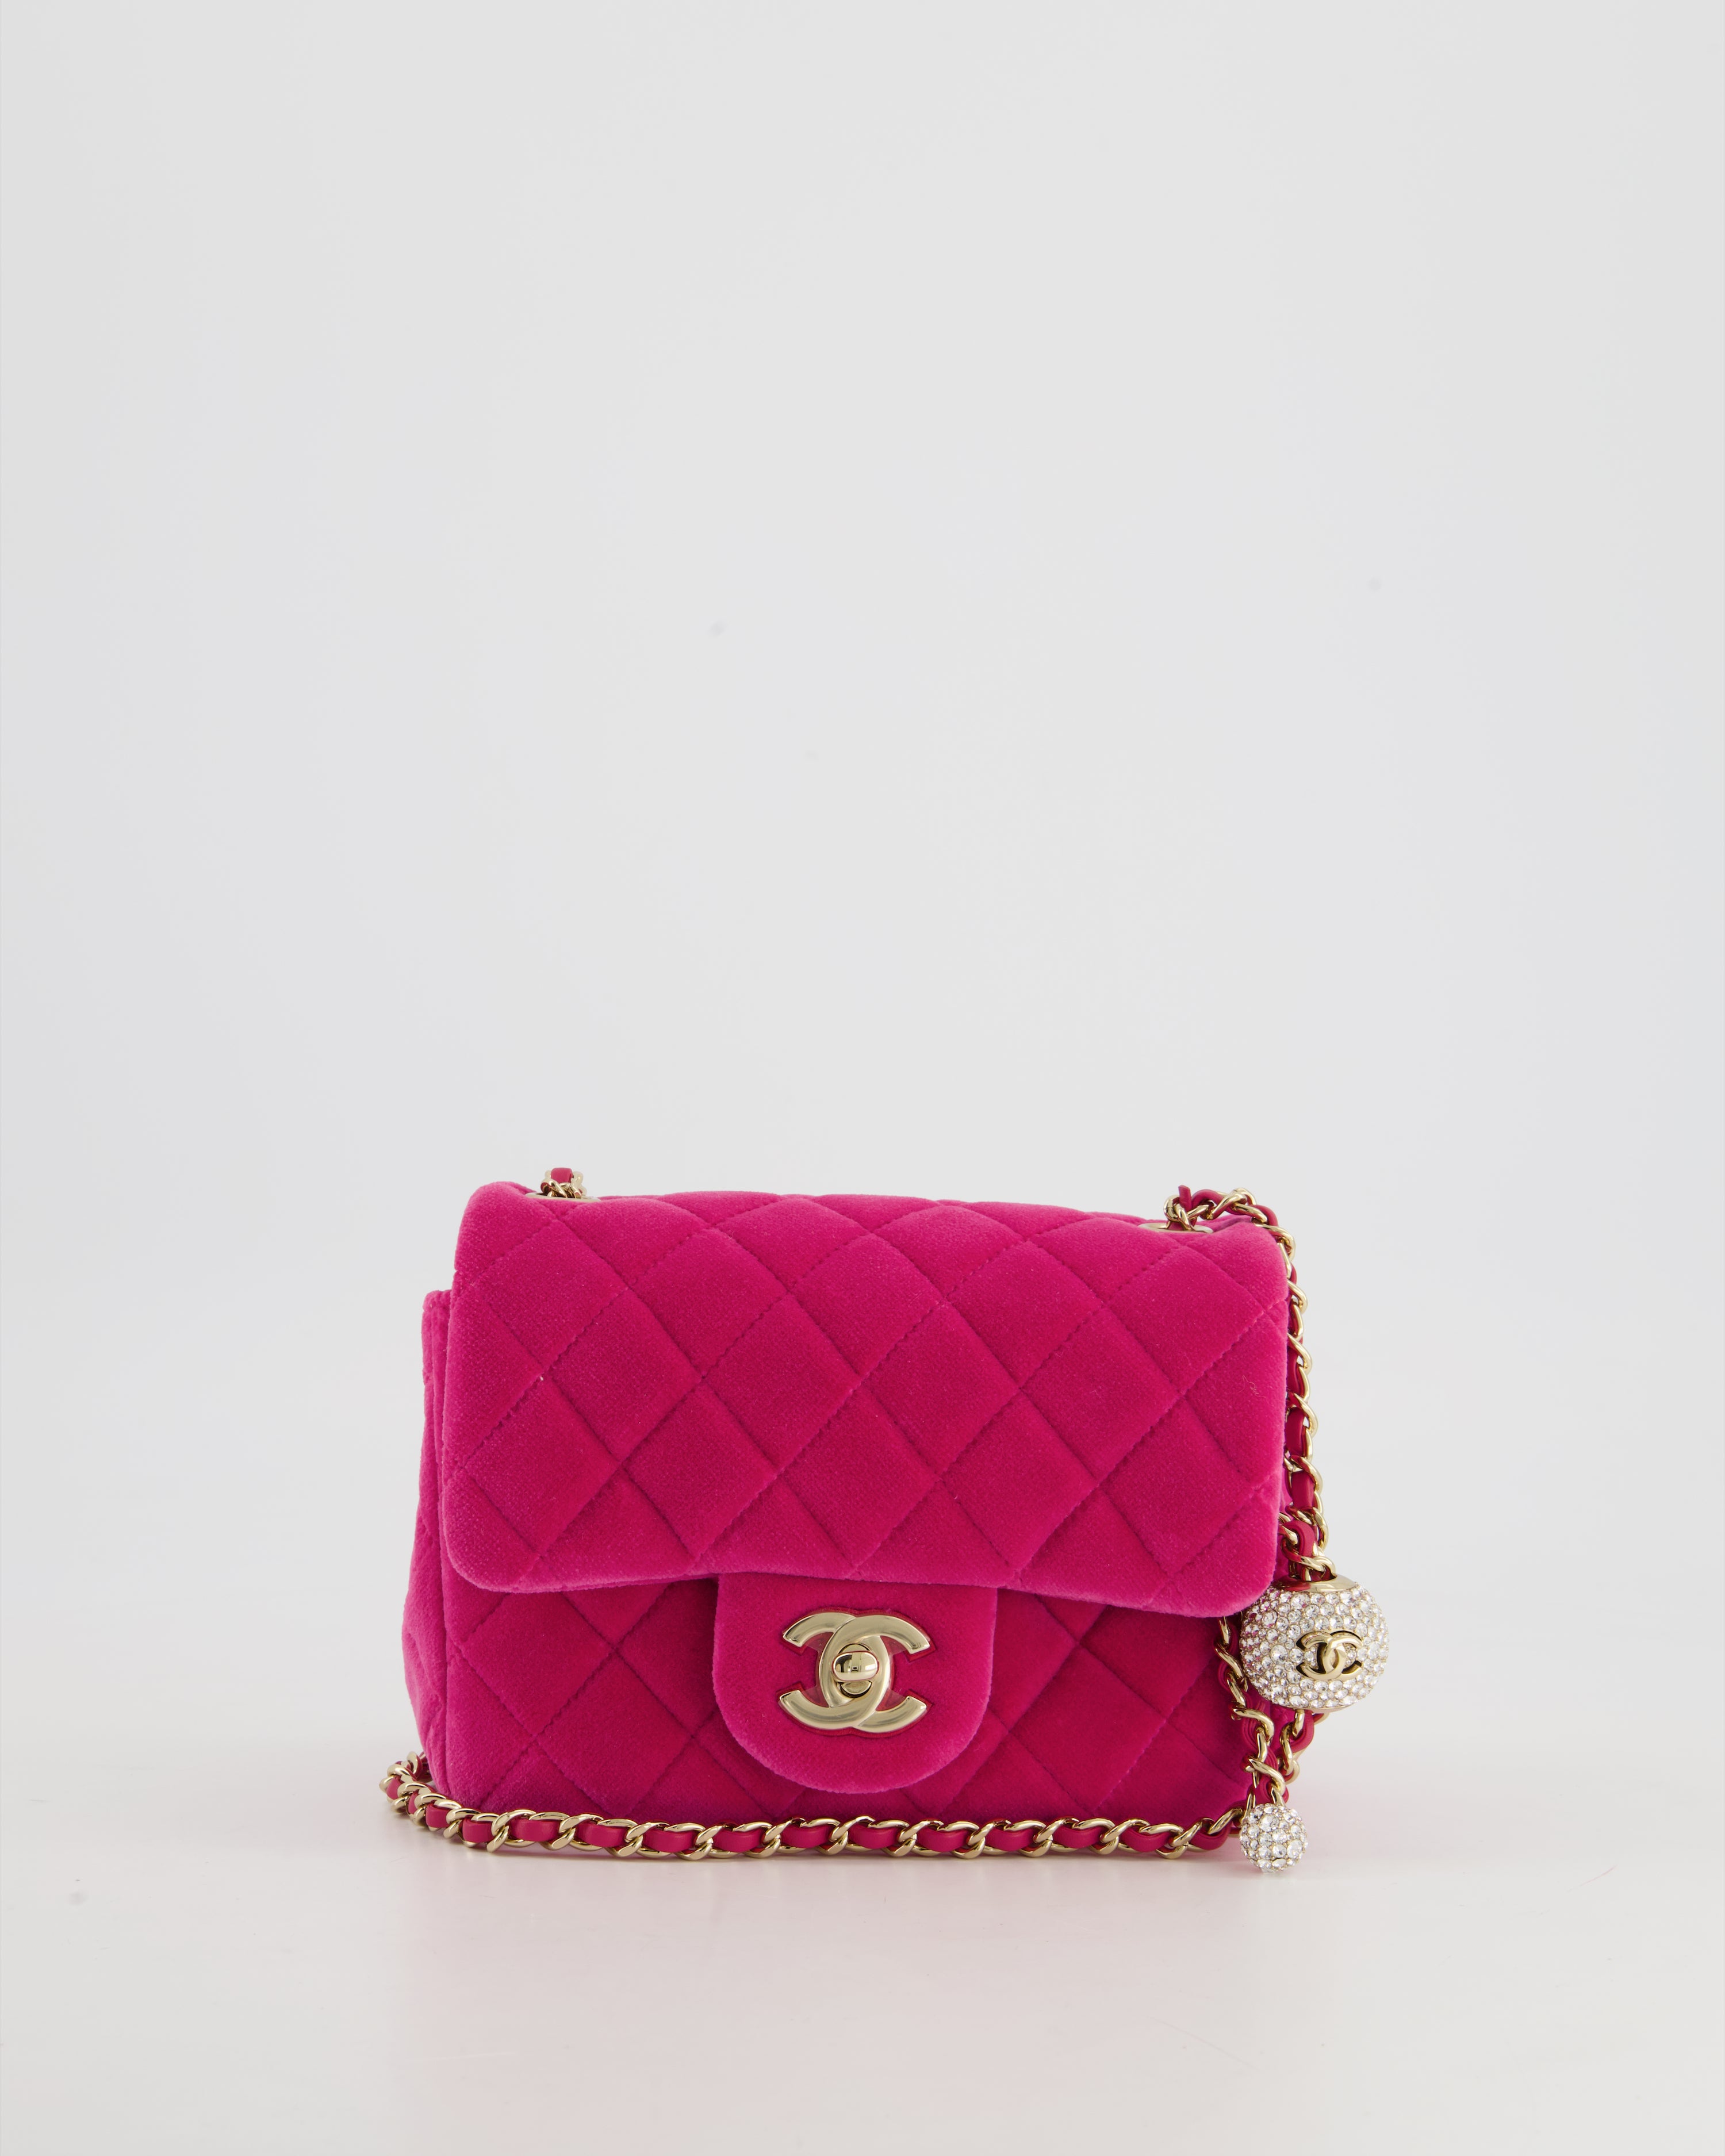 Another look Boy Chanel Quilted Velvet Bag  Bragmybag